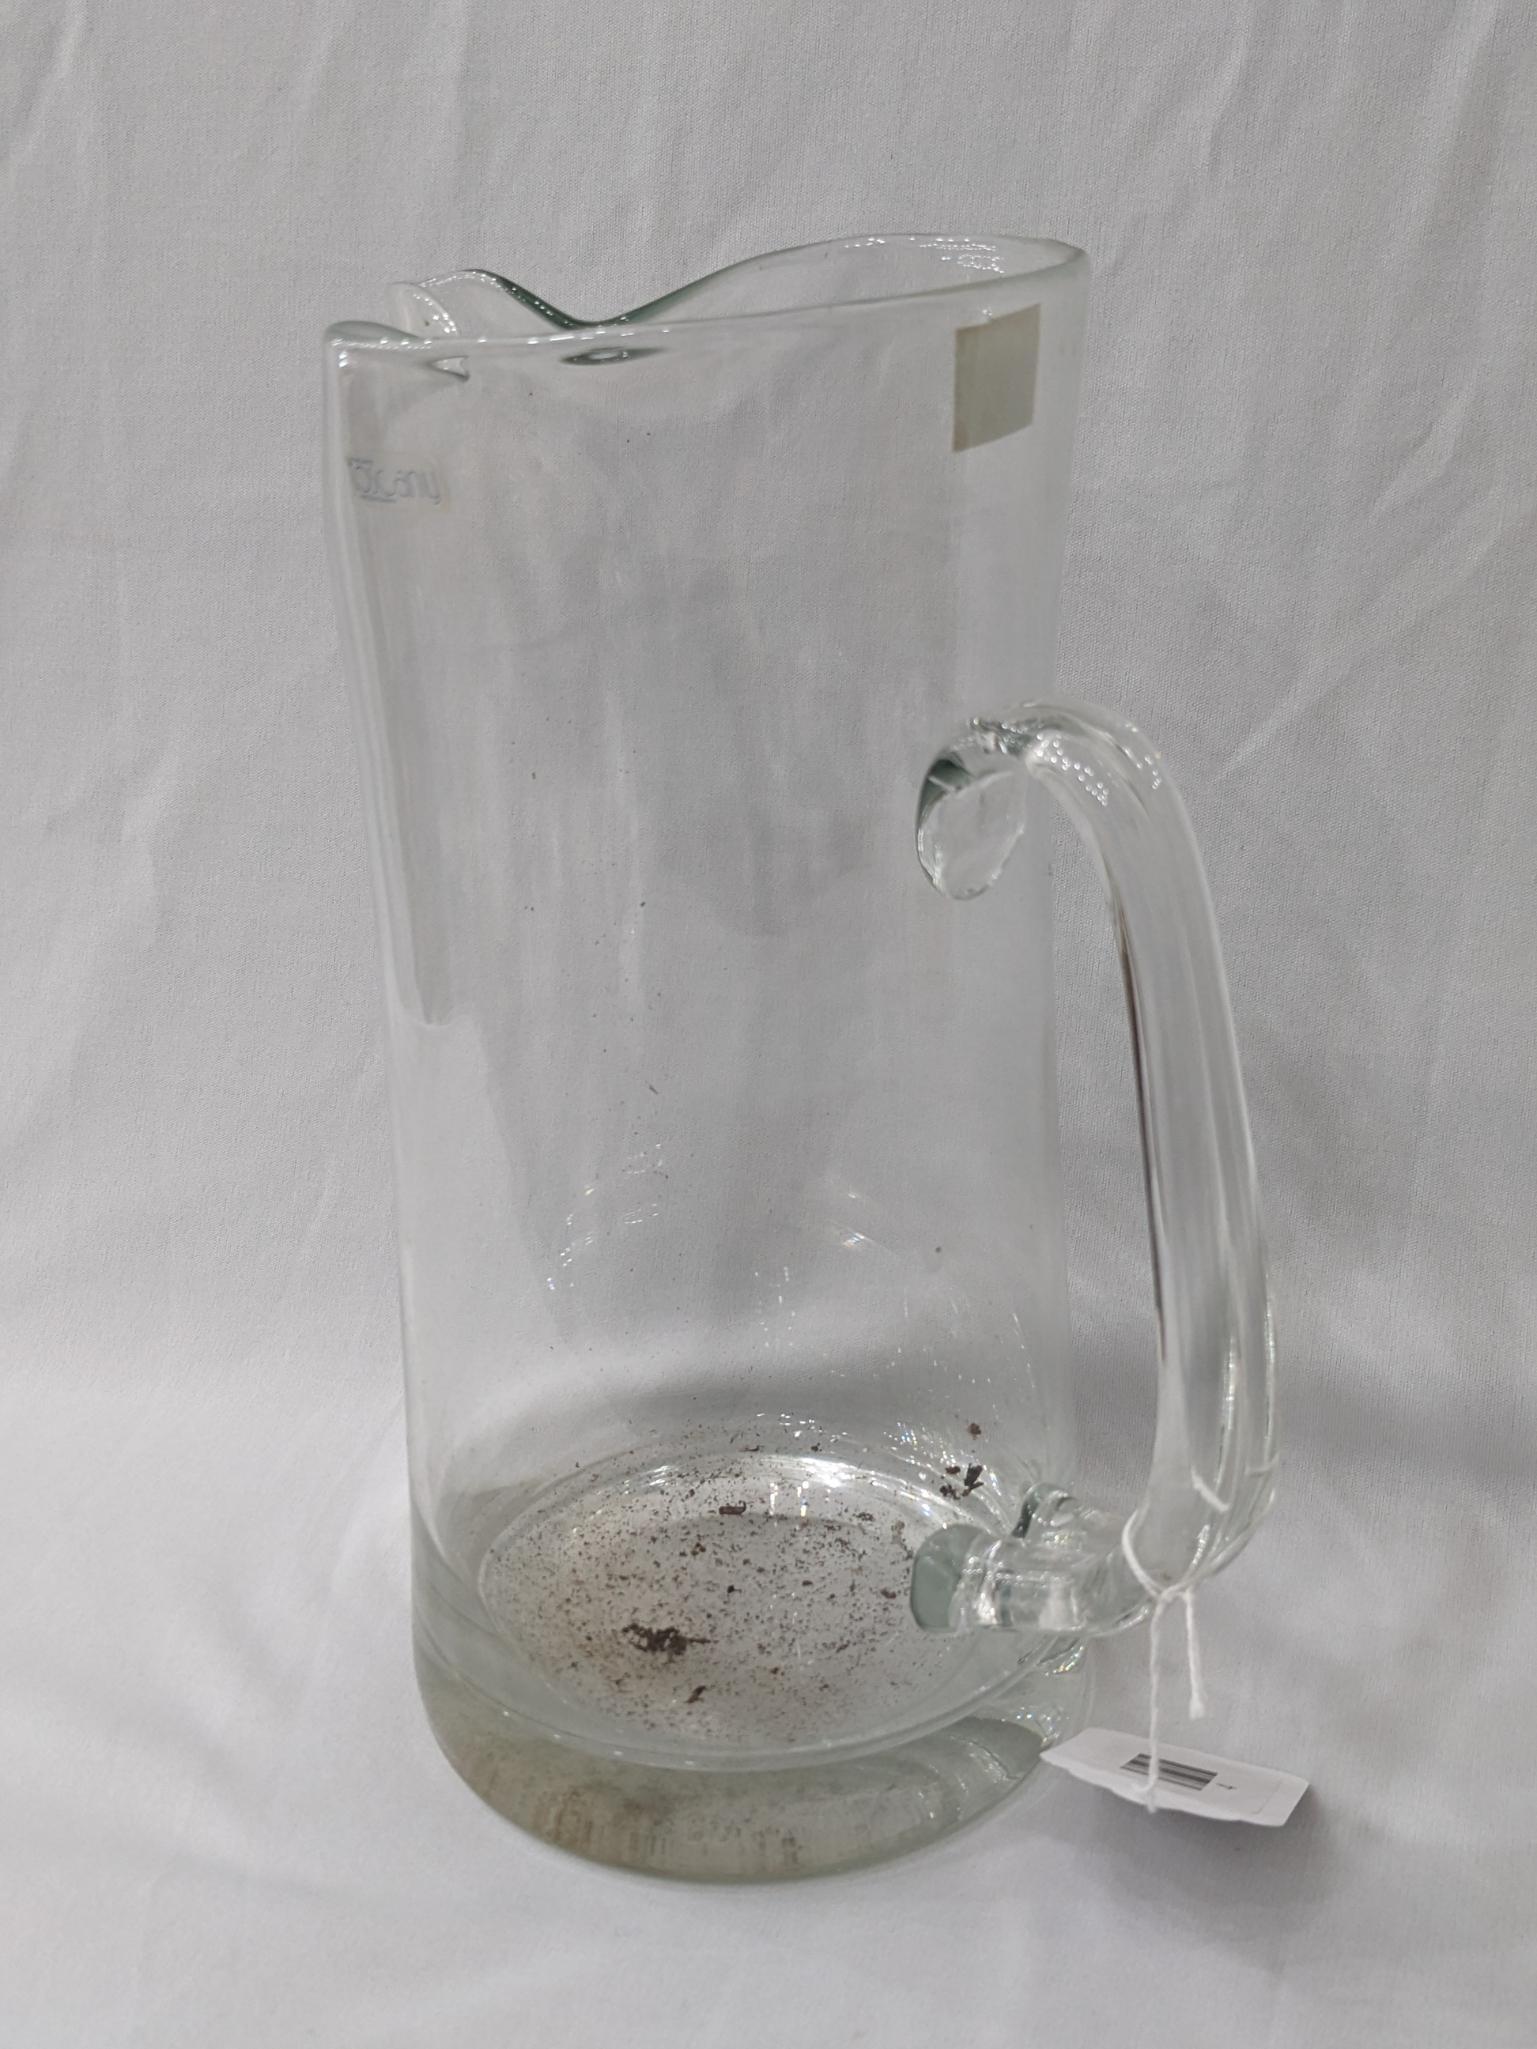 Hand made Tuscany pitcher with applied handle was made in Romania. In good condition, larger than